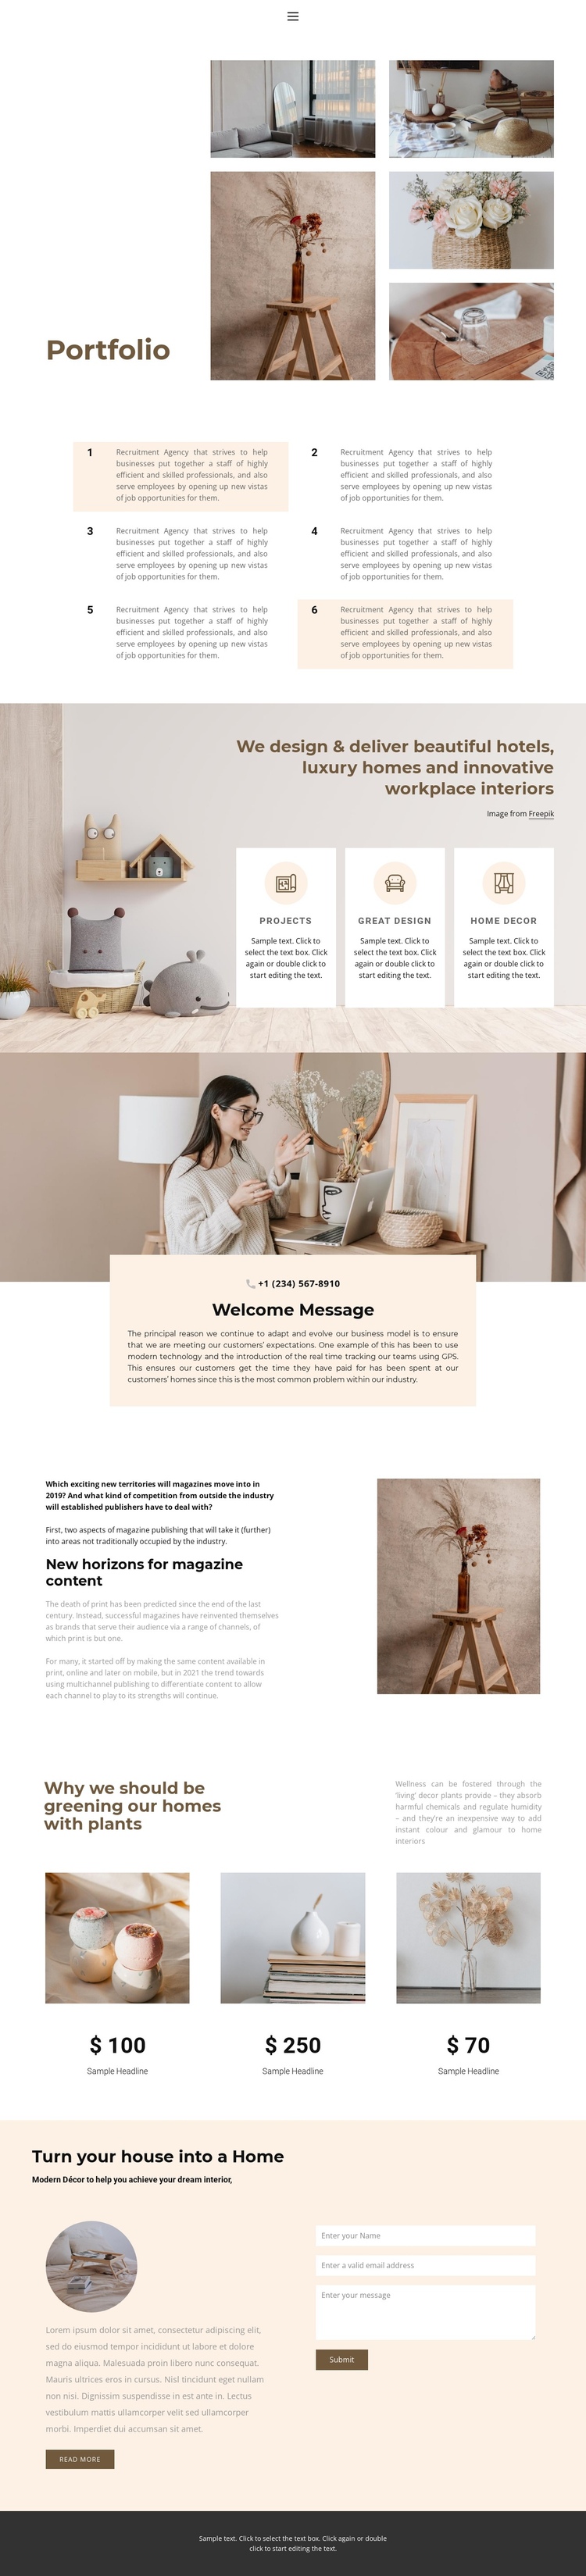 Decorate your home Website Builder Software